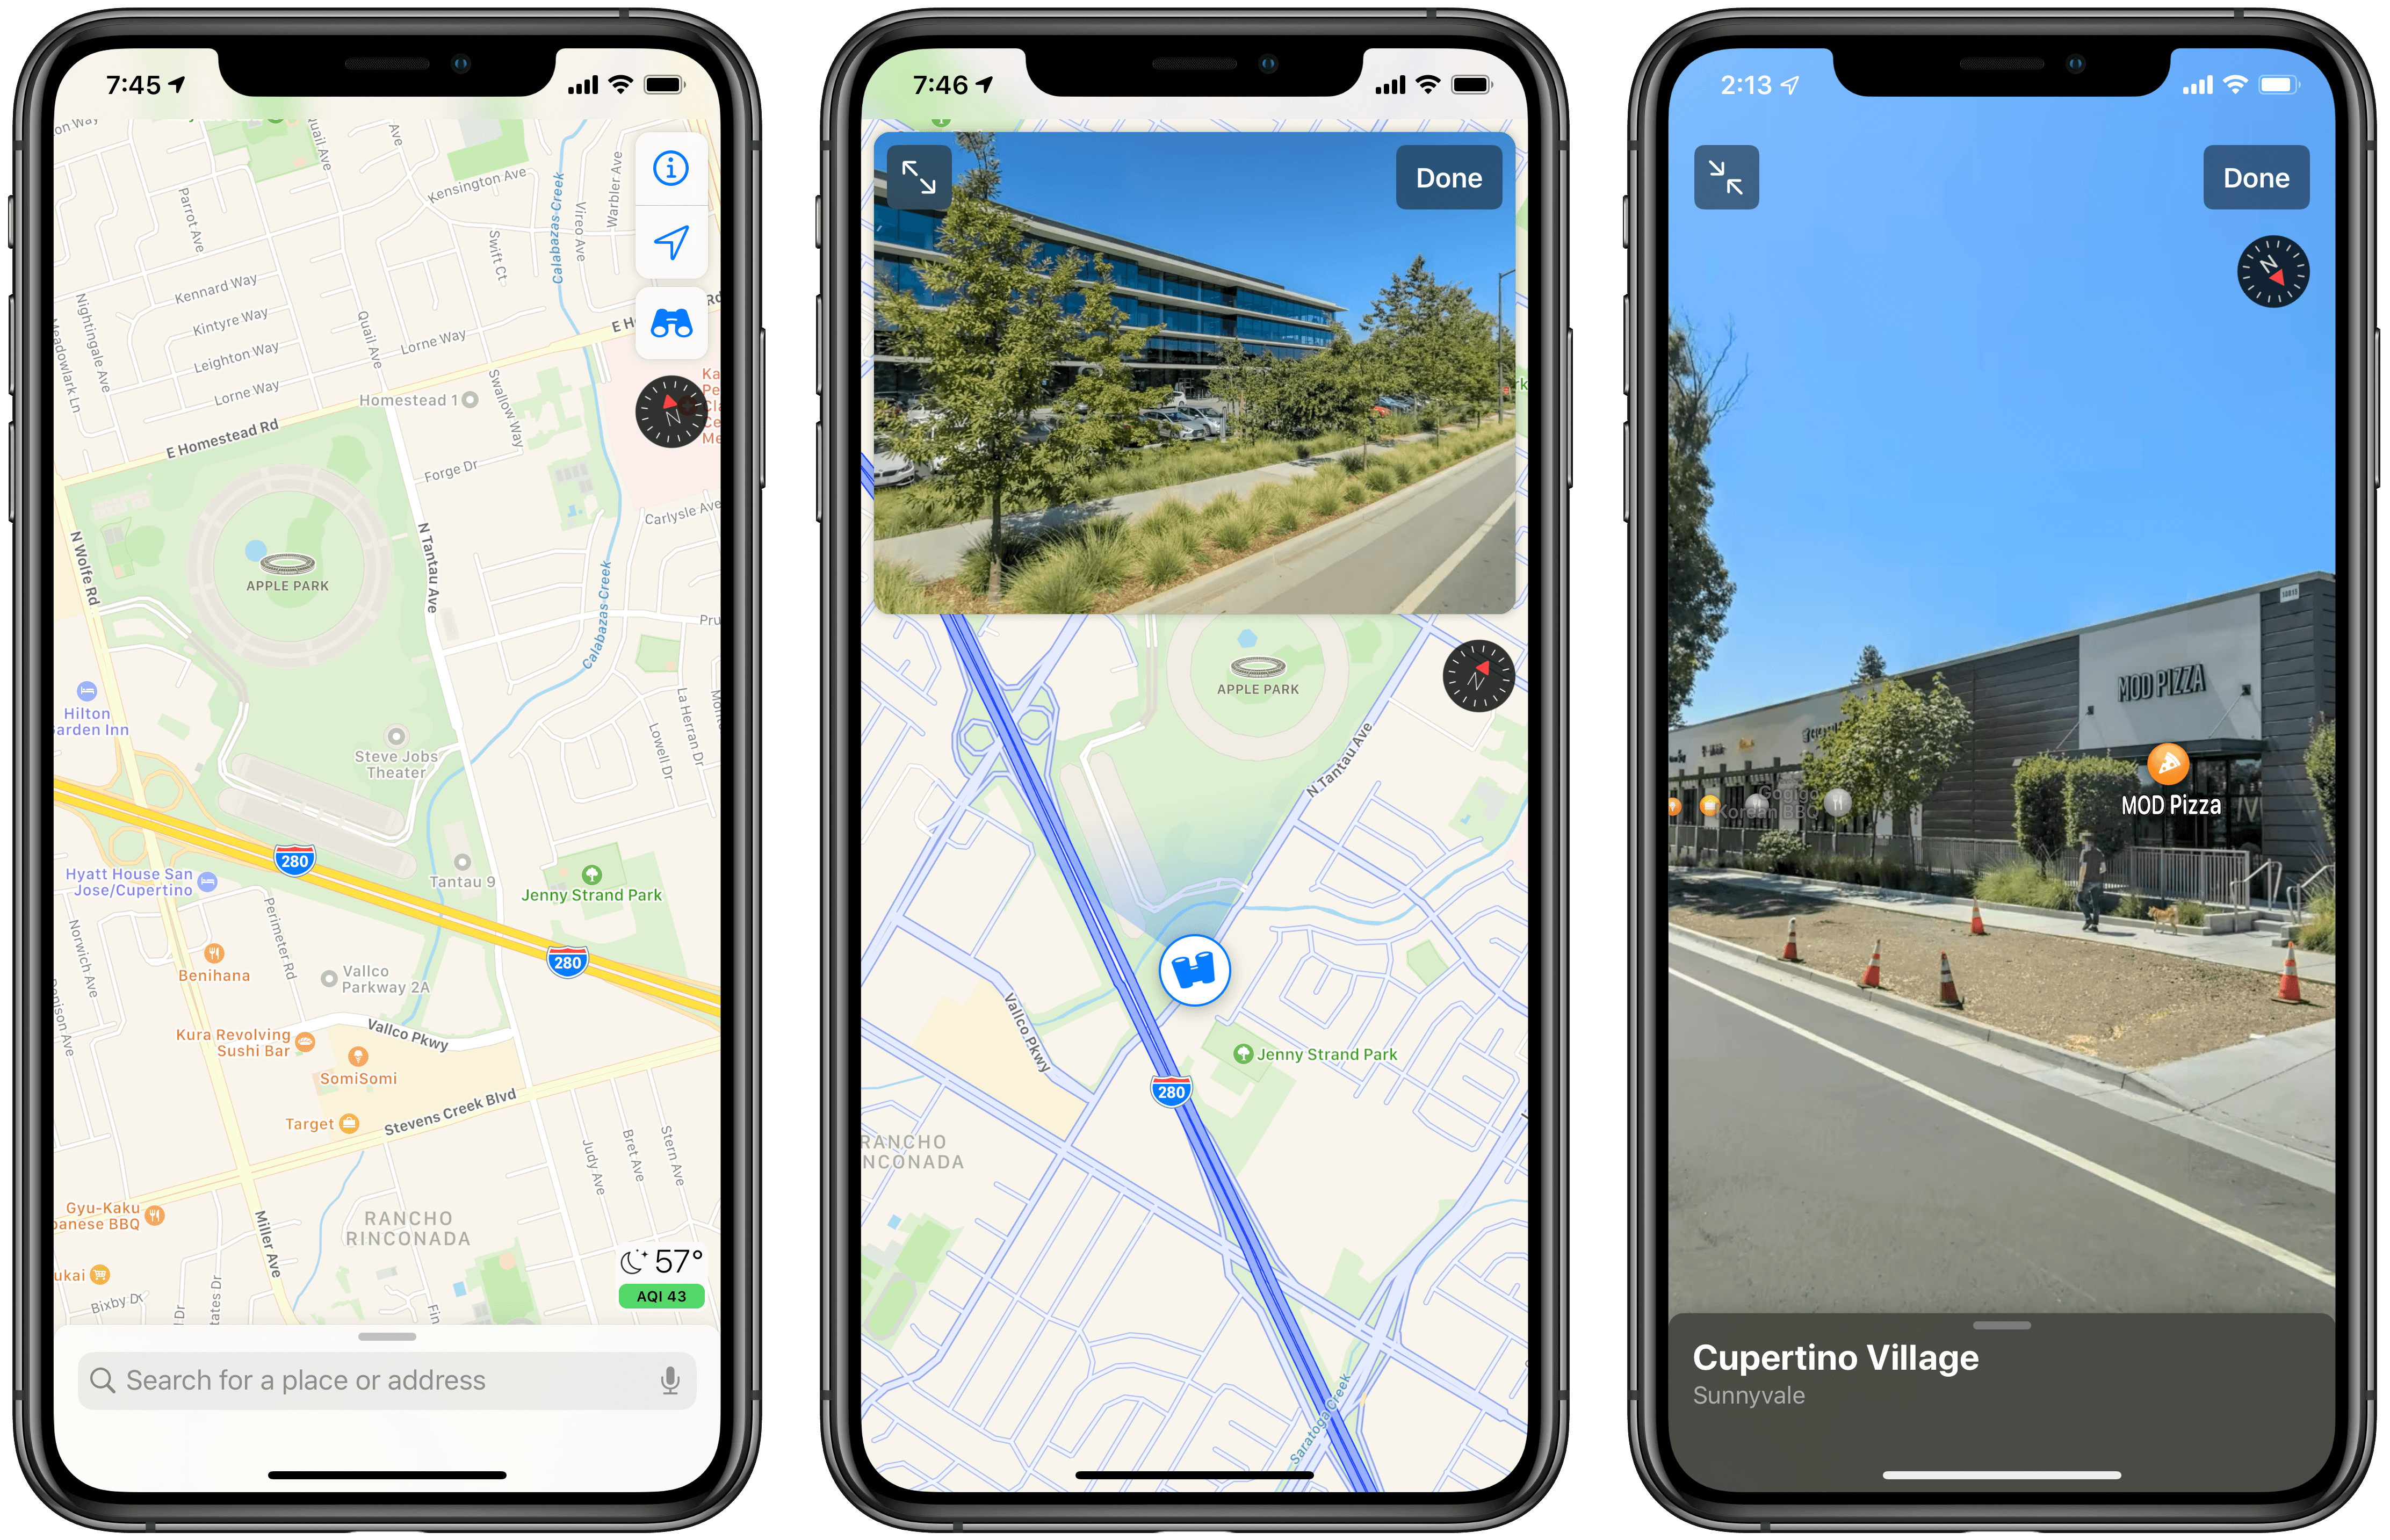 Maps in iOS 13